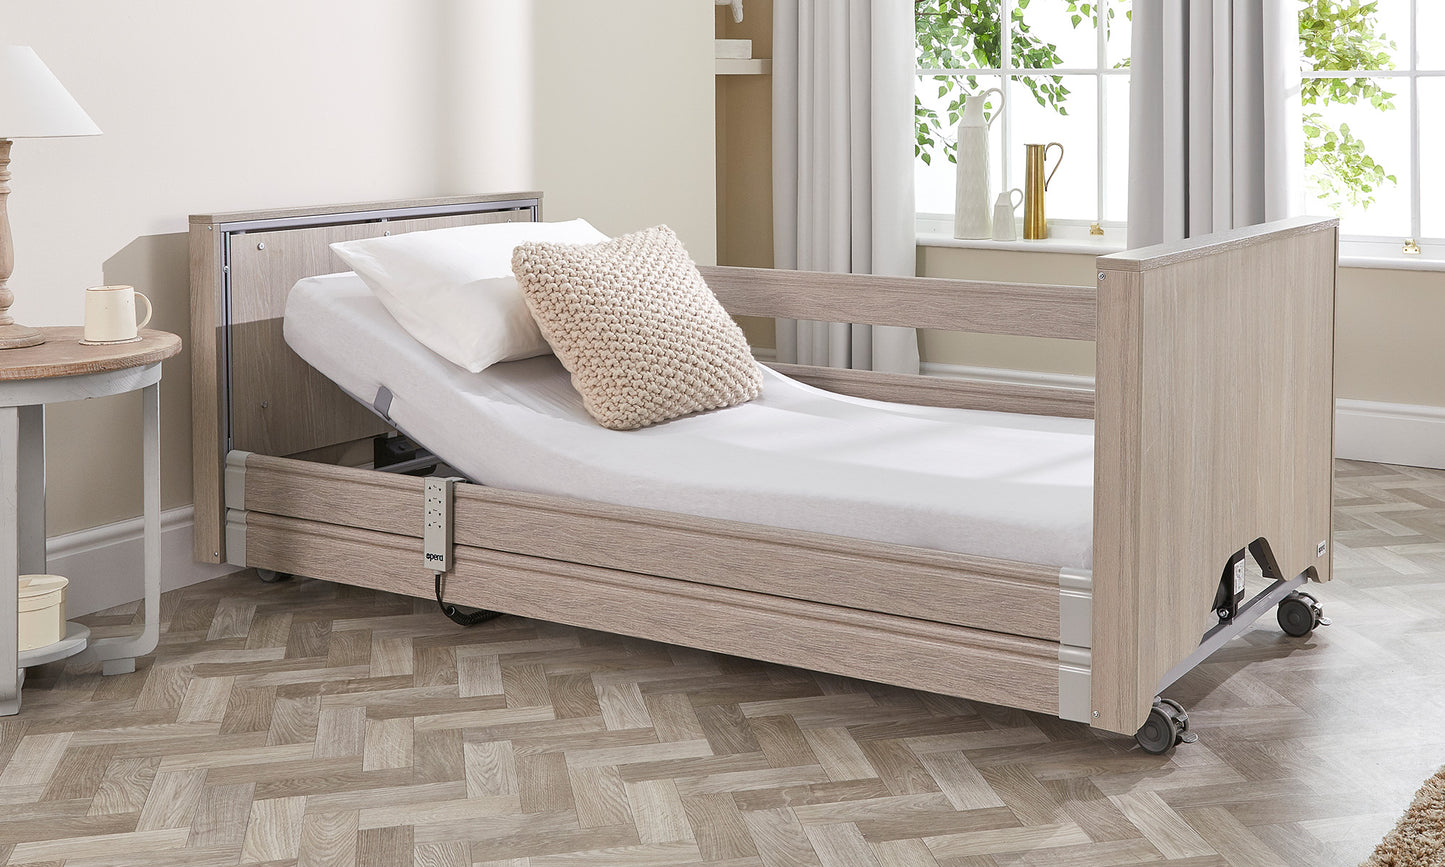 Classic Low Profiling Bed